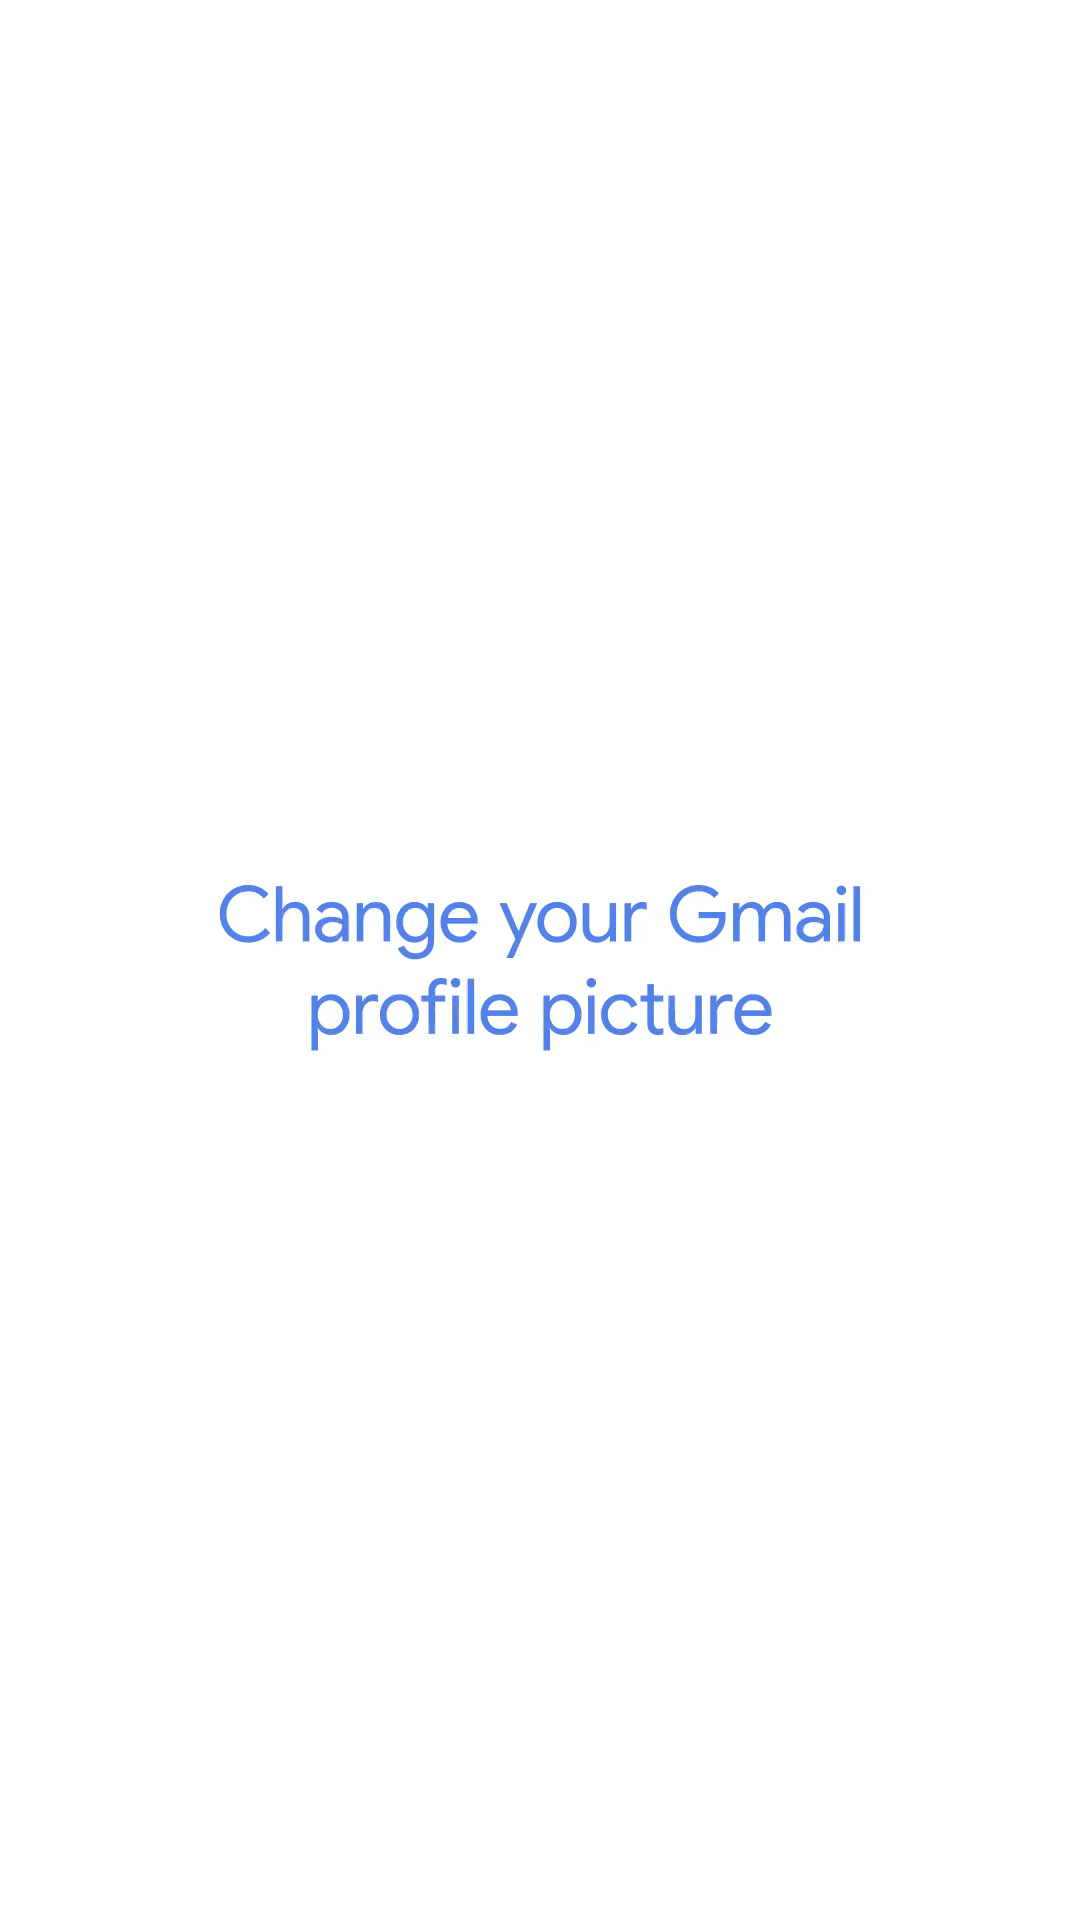 An illustration showing how to change the Gmail profile picture on Android